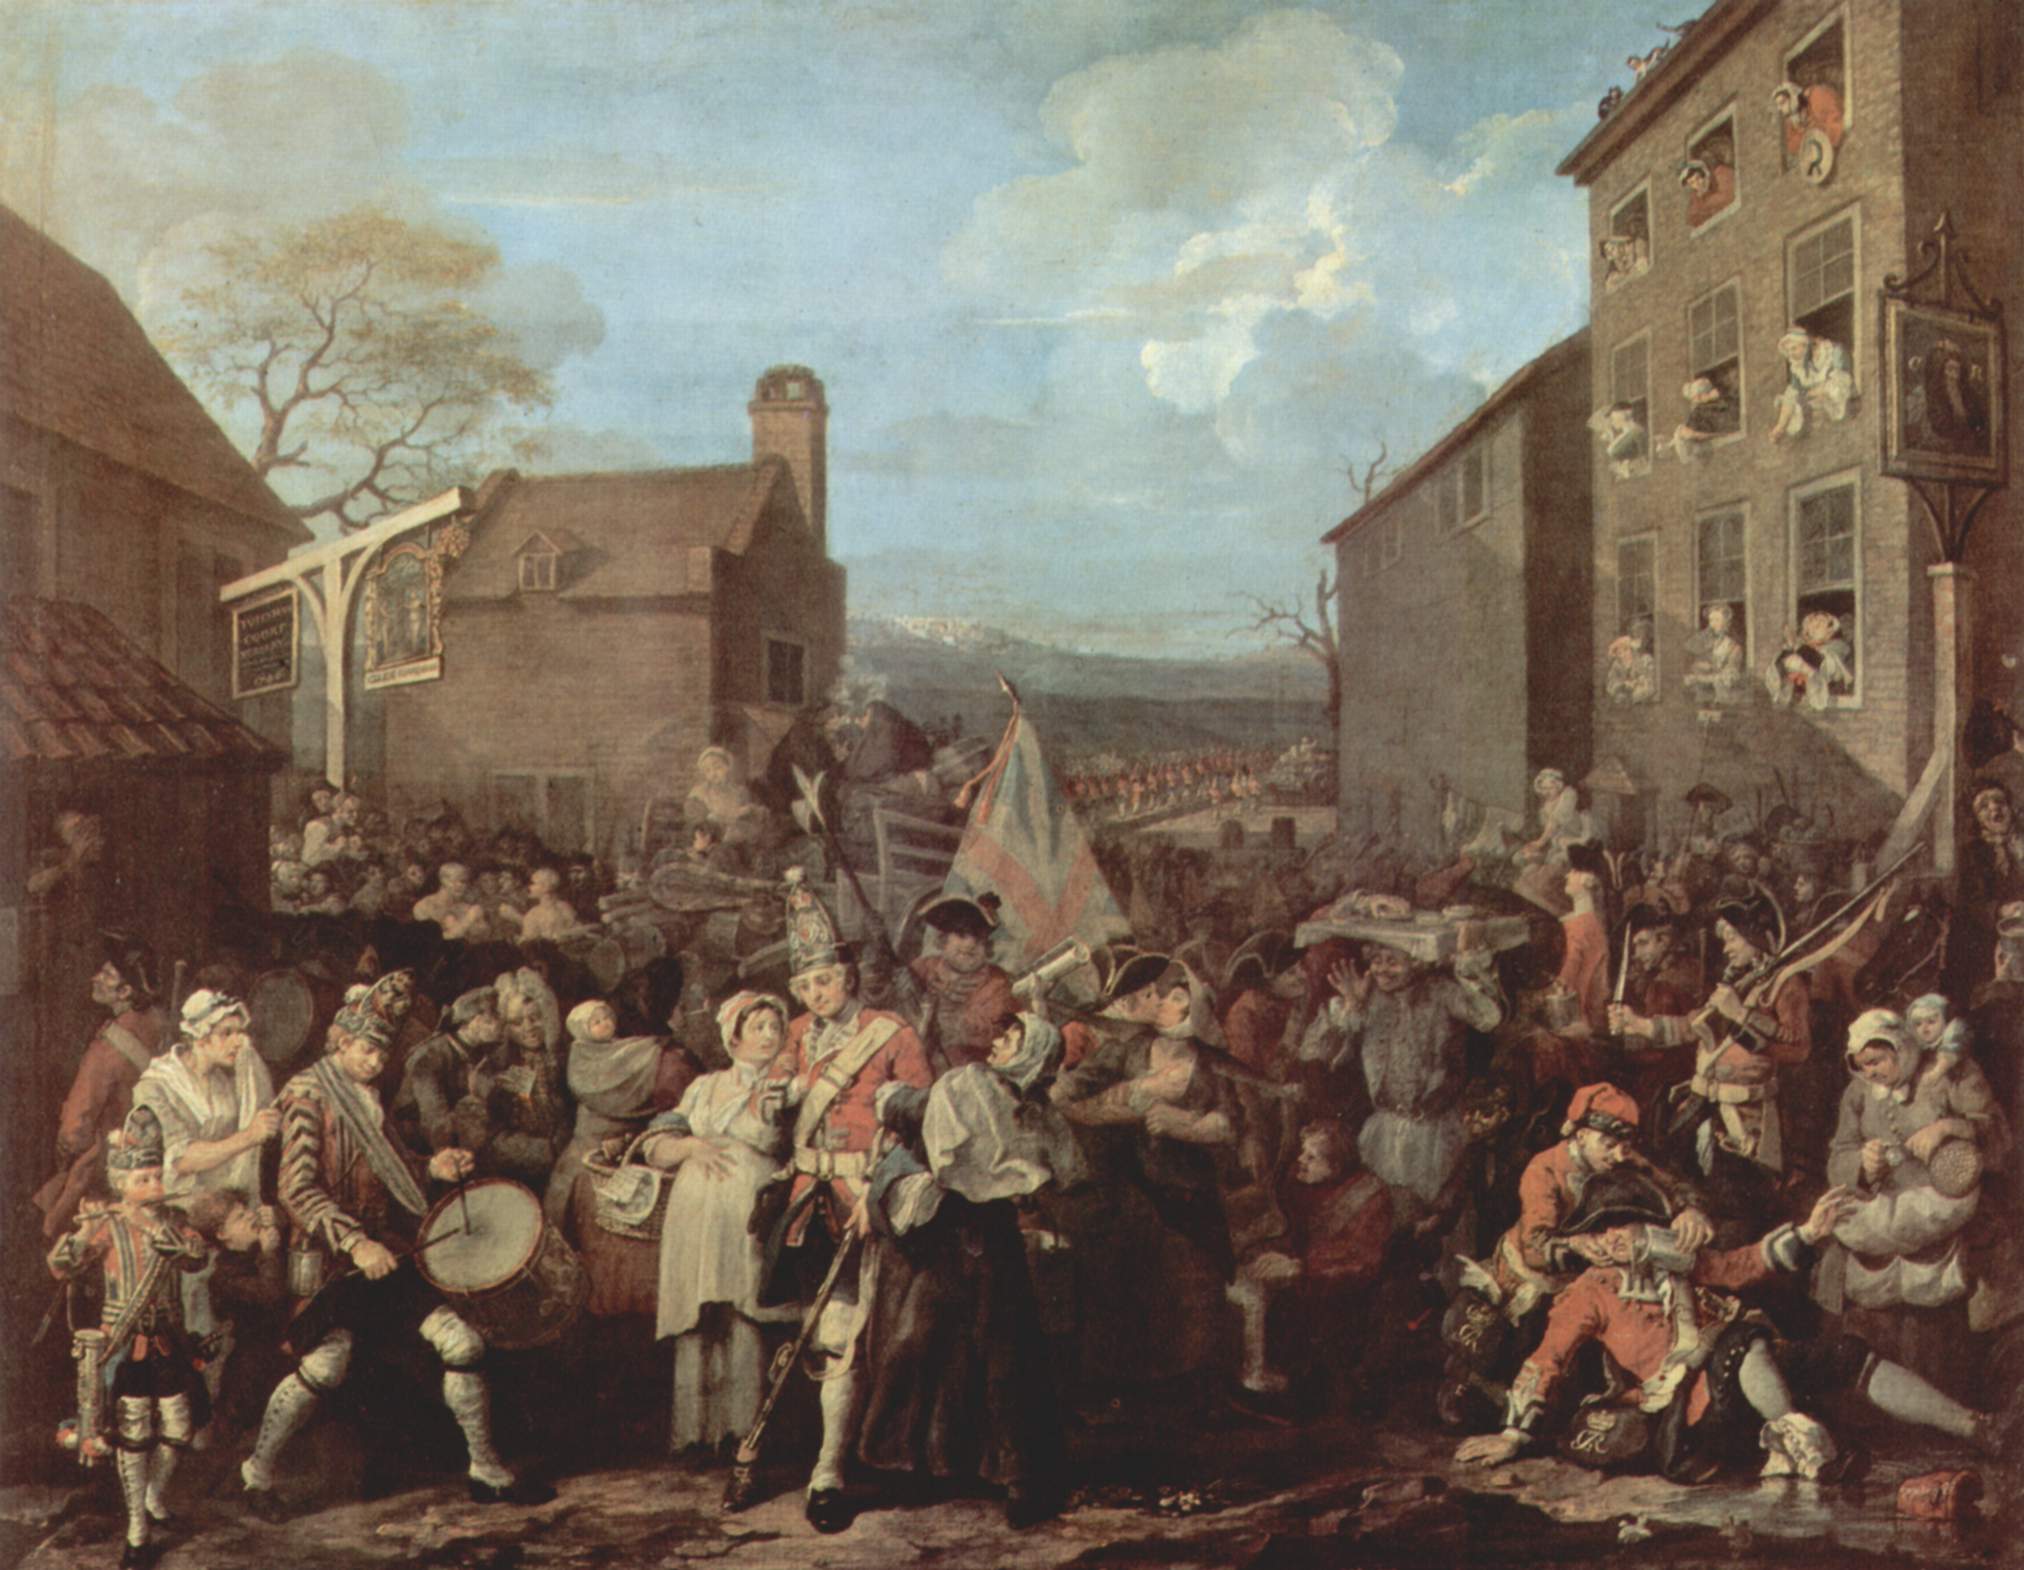 The March of the Guards to Finchley, by William Hogarth, 1750